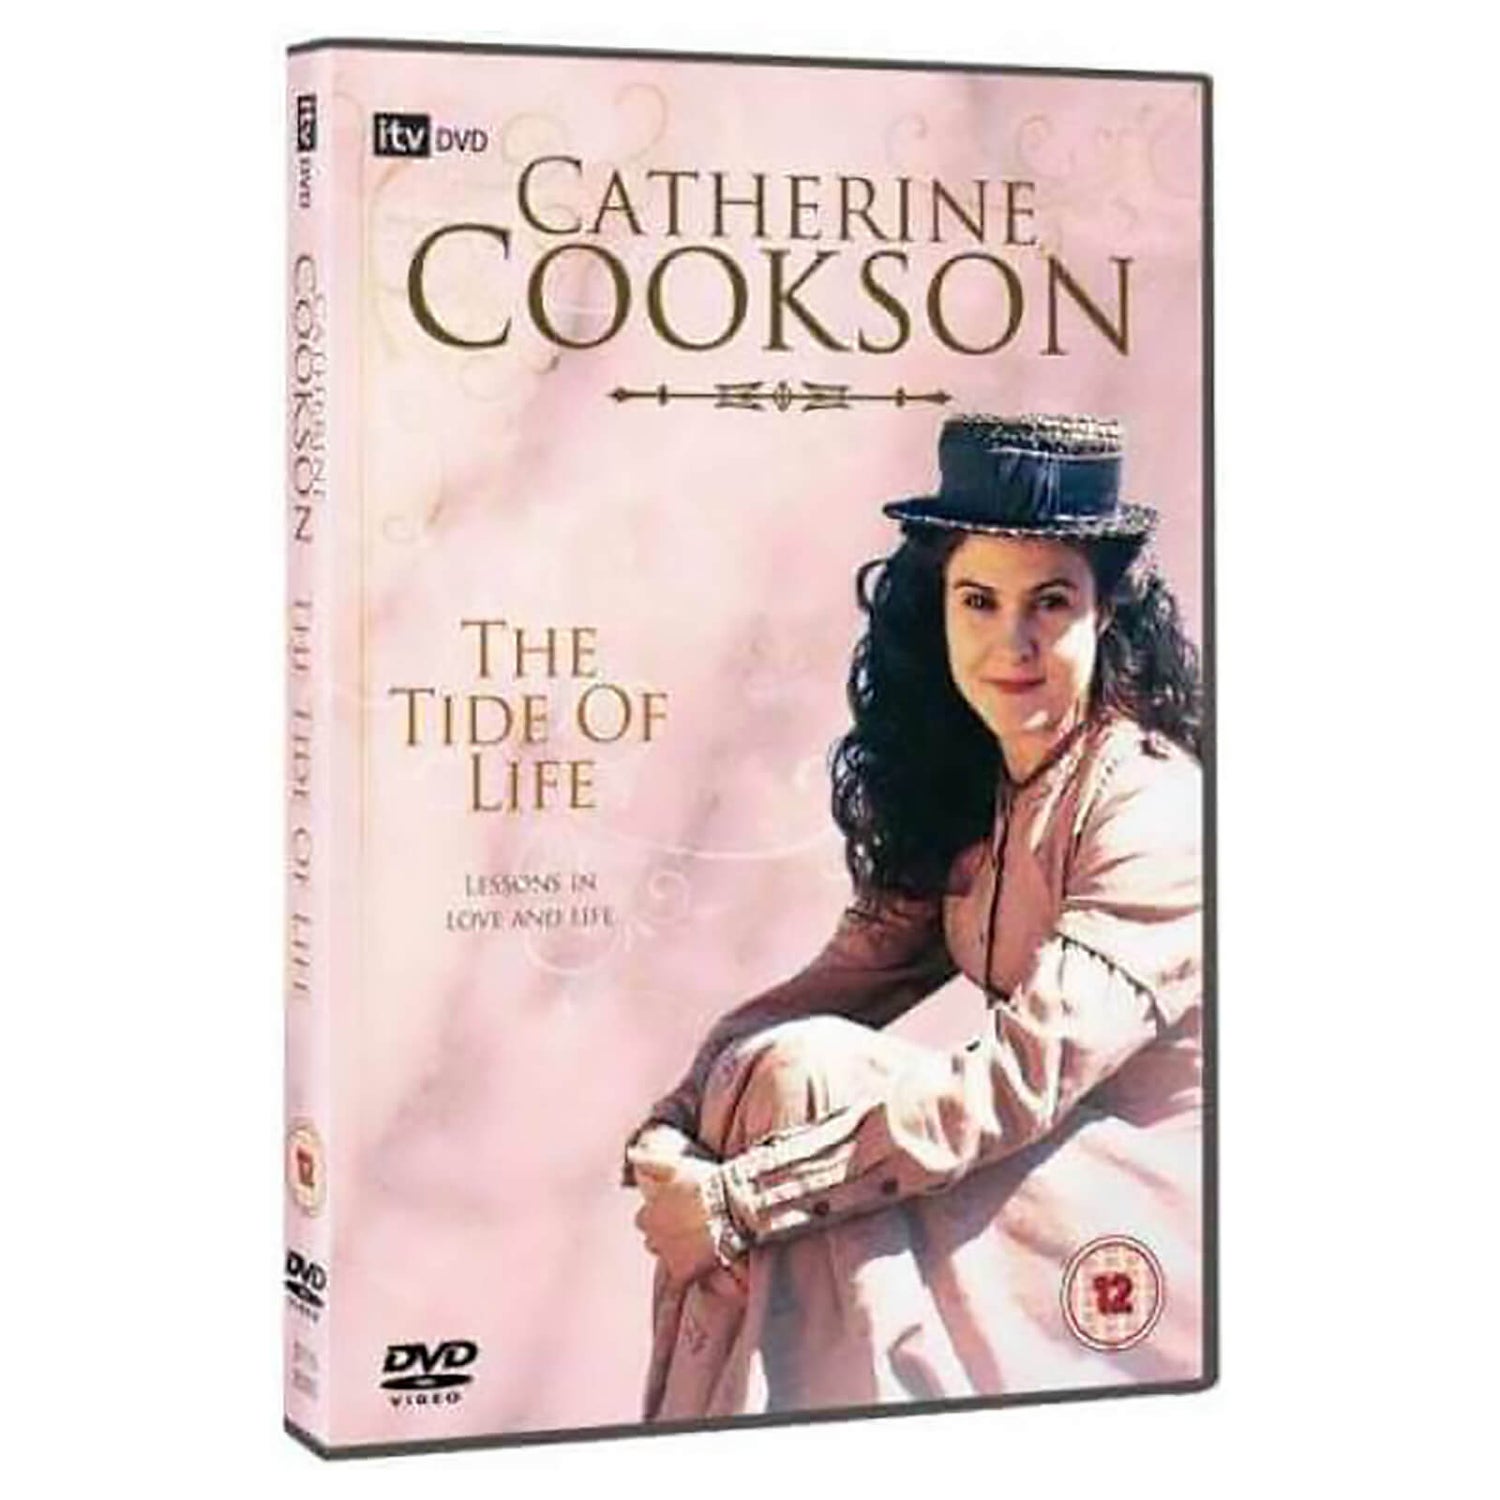 Catherine Cookson - The Tide Of Life